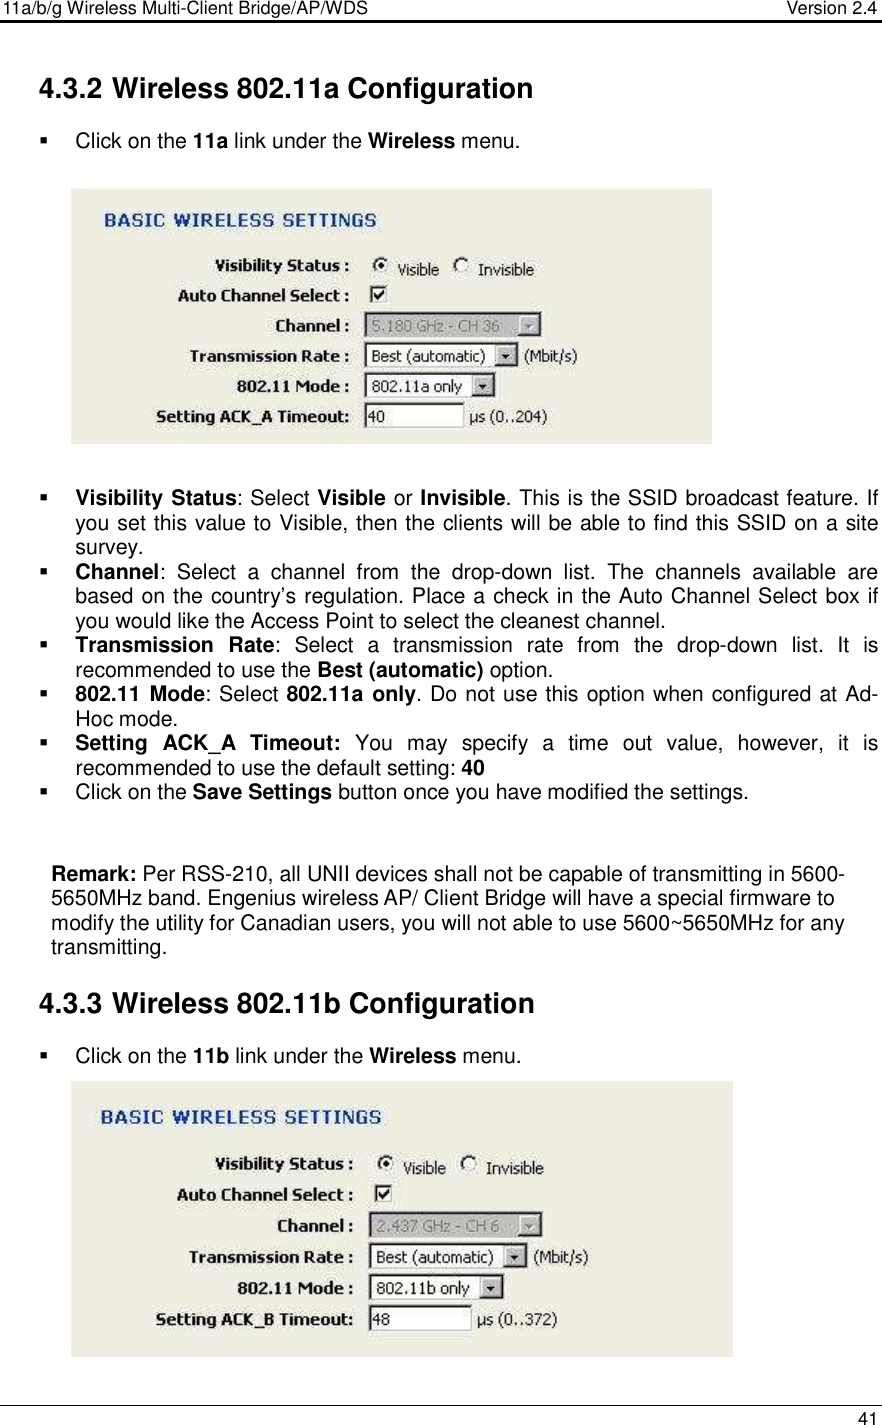 11a/b/g Wireless Multi-Client Bridge/AP/WDS                                  Version 2.4    41  4.3.2 Wireless 802.11a Configuration   Click on the 11a link under the Wireless menu.                Visibility Status: Select Visible or Invisible. This is the SSID broadcast feature. If you set this value to Visible, then the clients will be able to find this SSID on a site survey.    Channel:  Select  a  channel  from  the  drop-down  list.  The  channels  available  are based on the country’s regulation. Place a check in the Auto Channel Select box if you would like the Access Point to select the cleanest channel.  Transmission  Rate:  Select  a  transmission  rate  from  the  drop-down  list.  It  is recommended to use the Best (automatic) option.    802.11 Mode: Select 802.11a only. Do not use this option when configured at Ad-Hoc mode.  Setting  ACK_A Timeout:  You  may  specify  a  time  out  value,  however,  it  is recommended to use the default setting: 40     Click on the Save Settings button once you have modified the settings.  Remark: Per RSS-210, all UNII devices shall not be capable of transmitting in 5600-5650MHz band. Engenius wireless AP/ Client Bridge will have a special firmware to modify the utility for Canadian users, you will not able to use 5600~5650MHz for any transmitting.  4.3.3 Wireless 802.11b Configuration   Click on the 11b link under the Wireless menu.                 